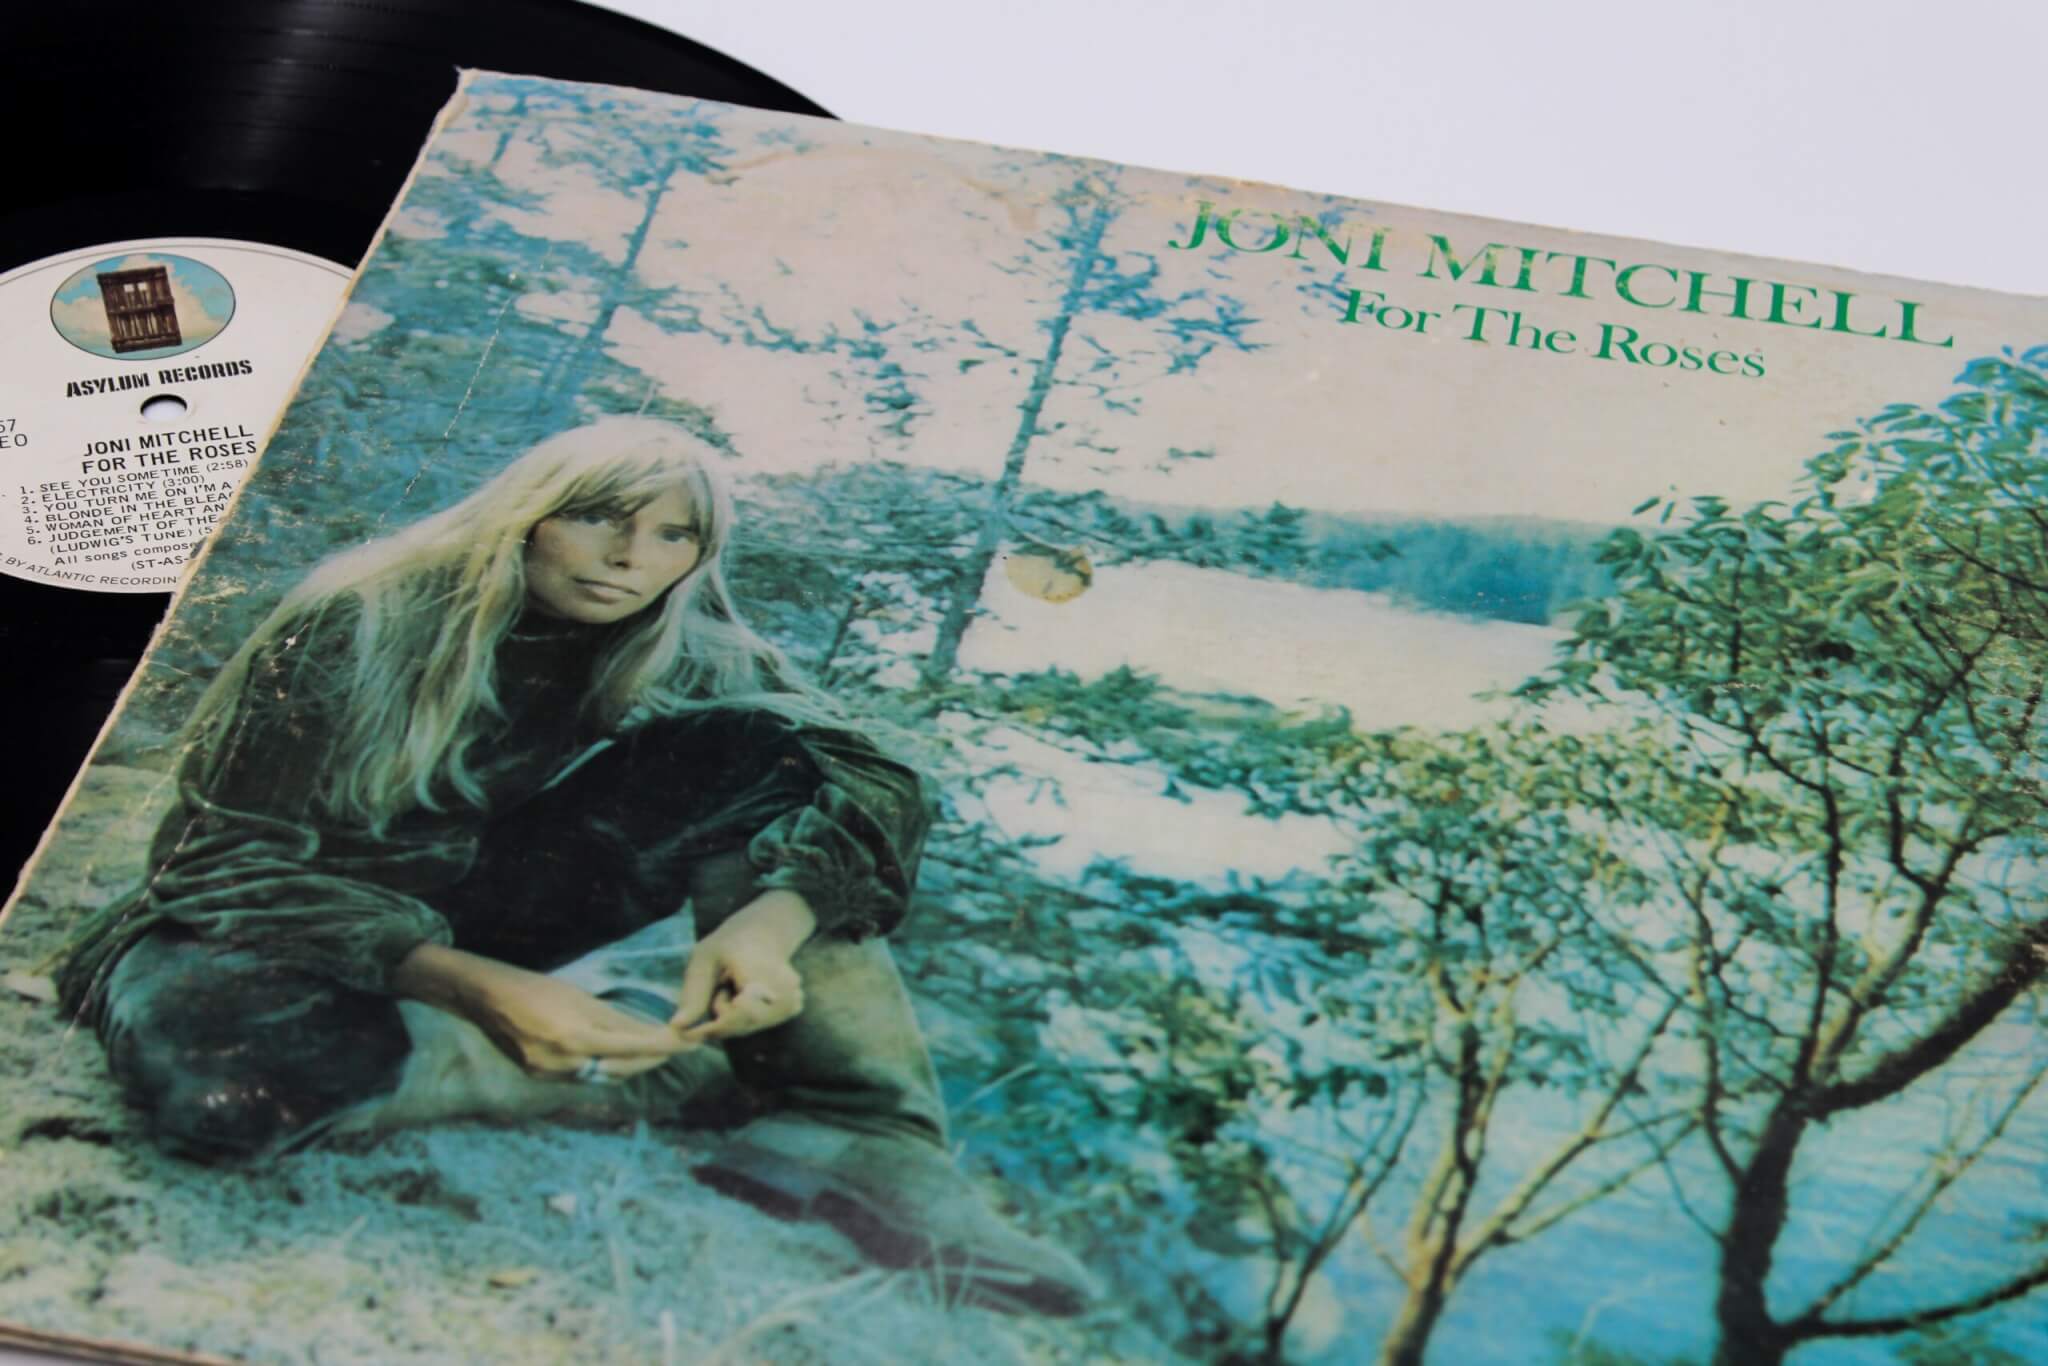 Joni Mitchell's "For The Roses" vinyl record